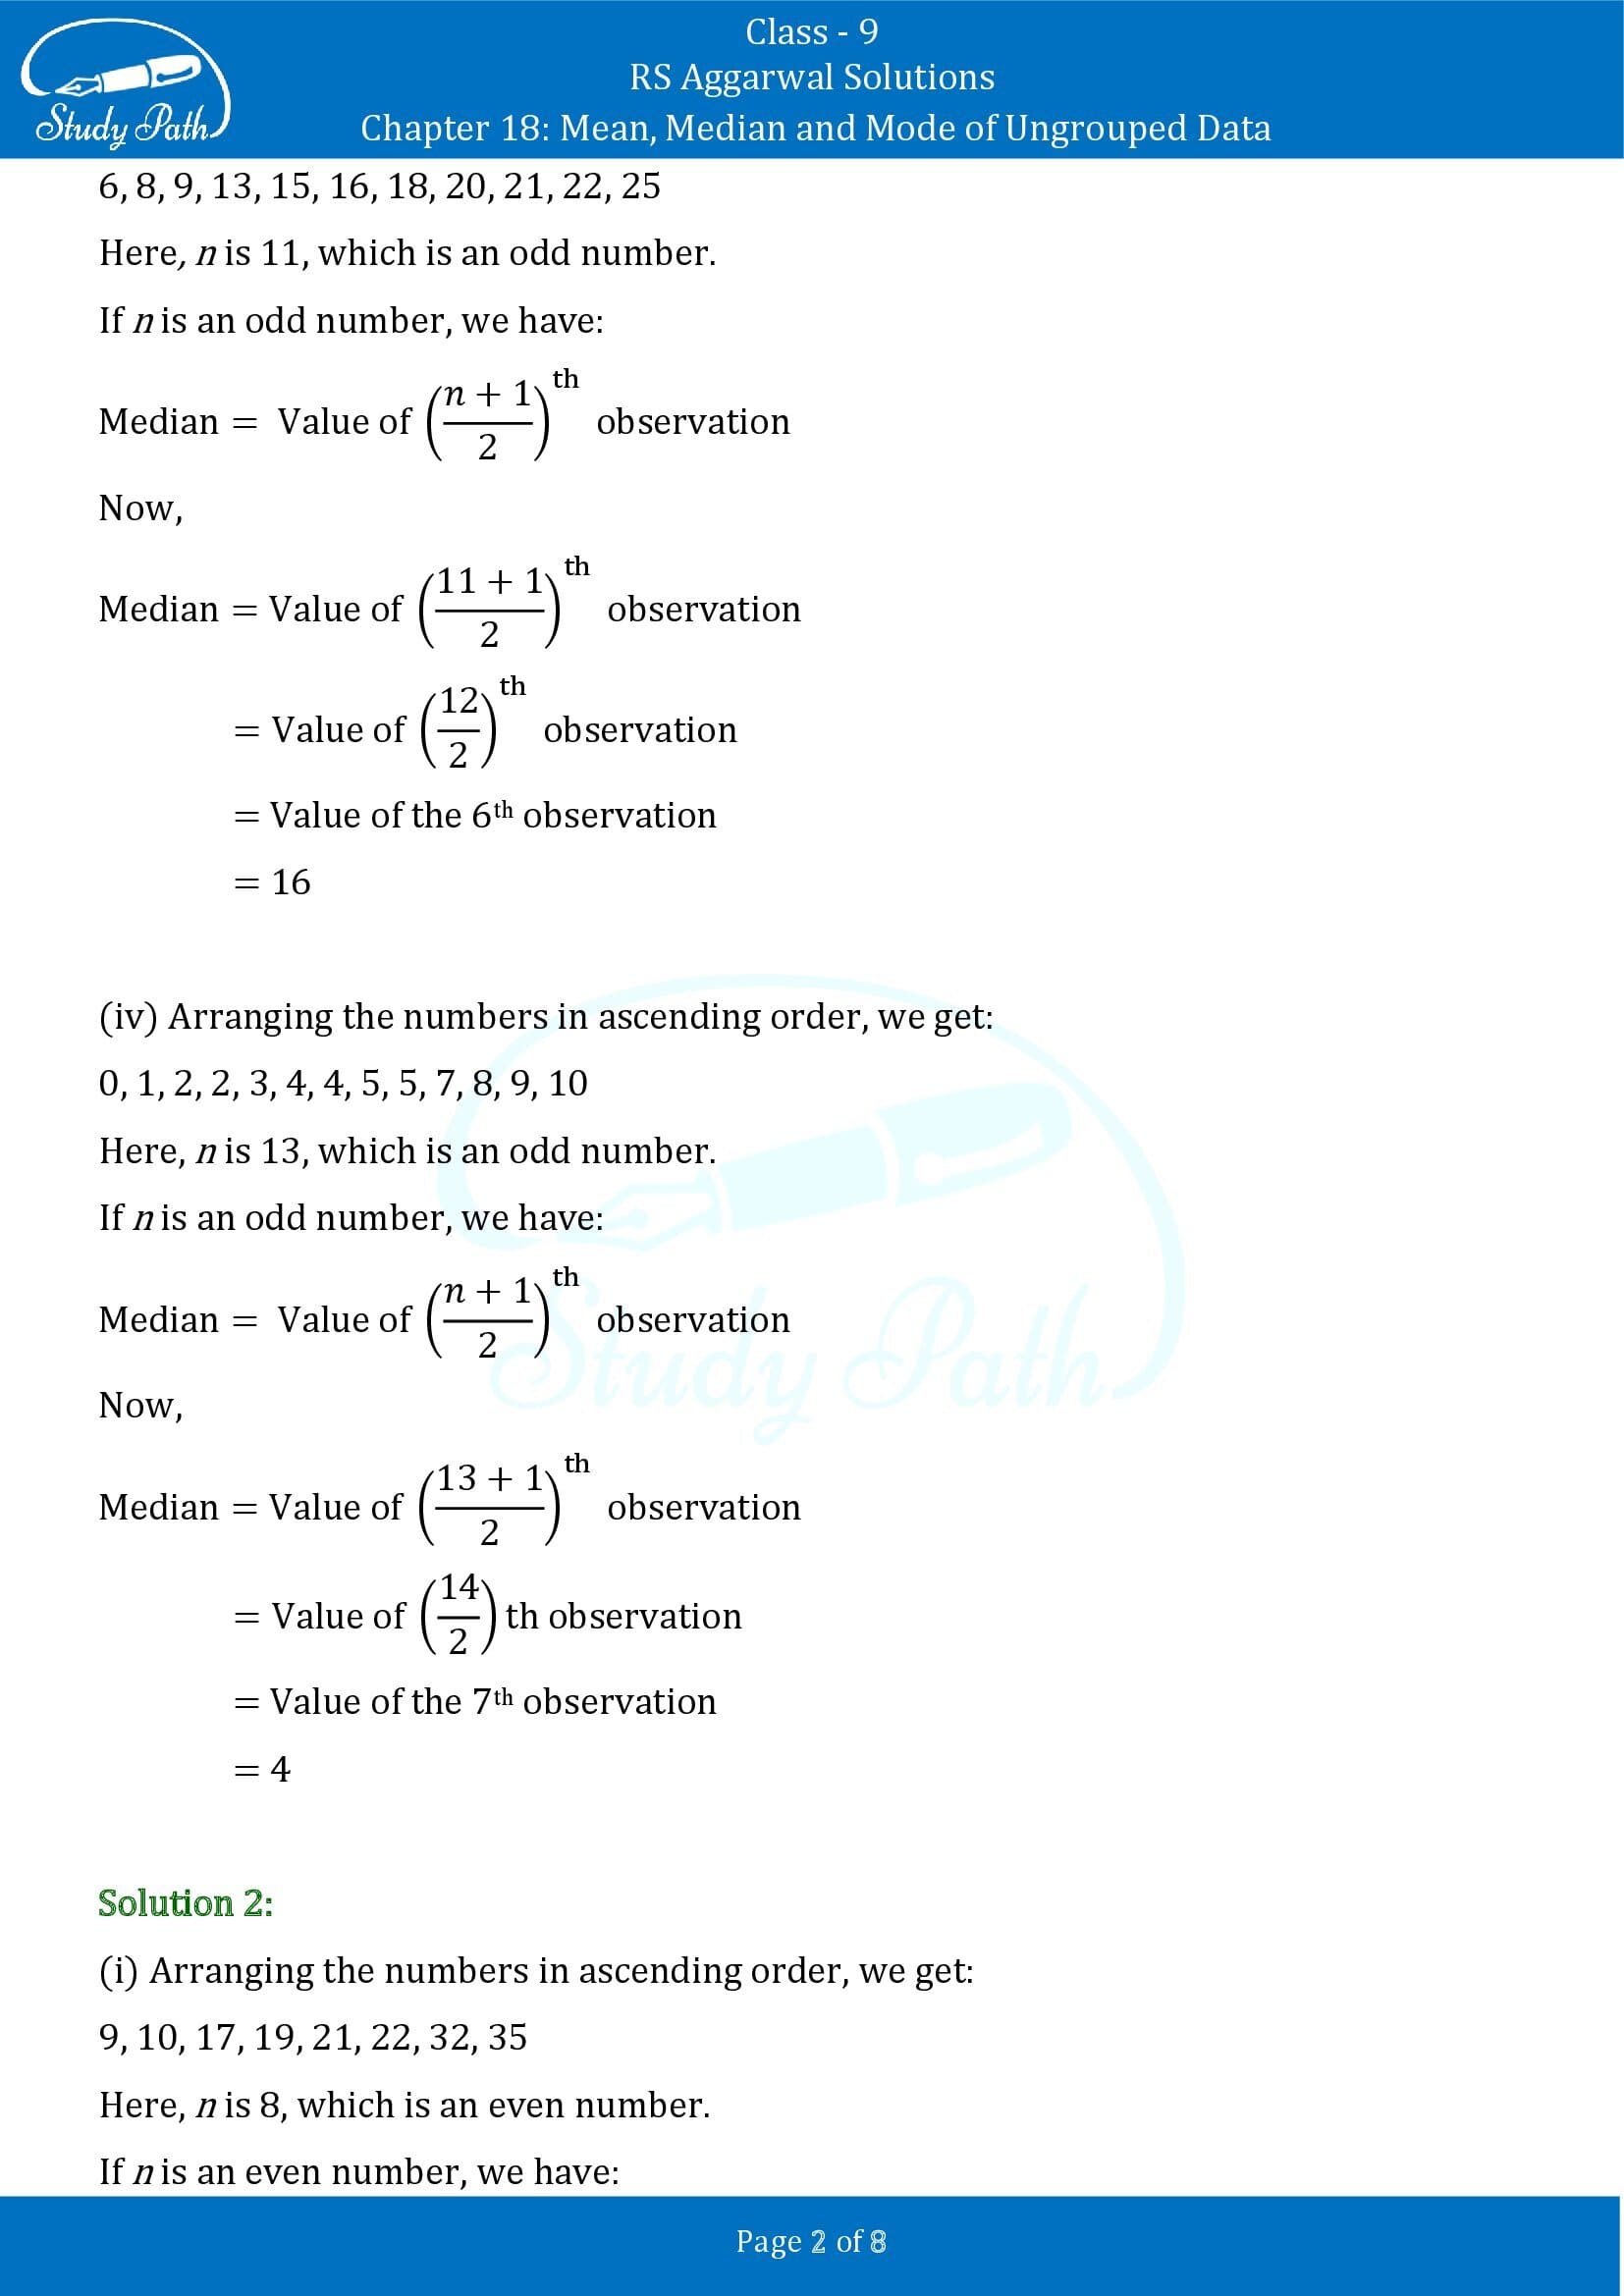 RS Aggarwal Solutions Class 9 Chapter 18 Mean Median and Mode of Ungrouped Data Exercise 18C 0002